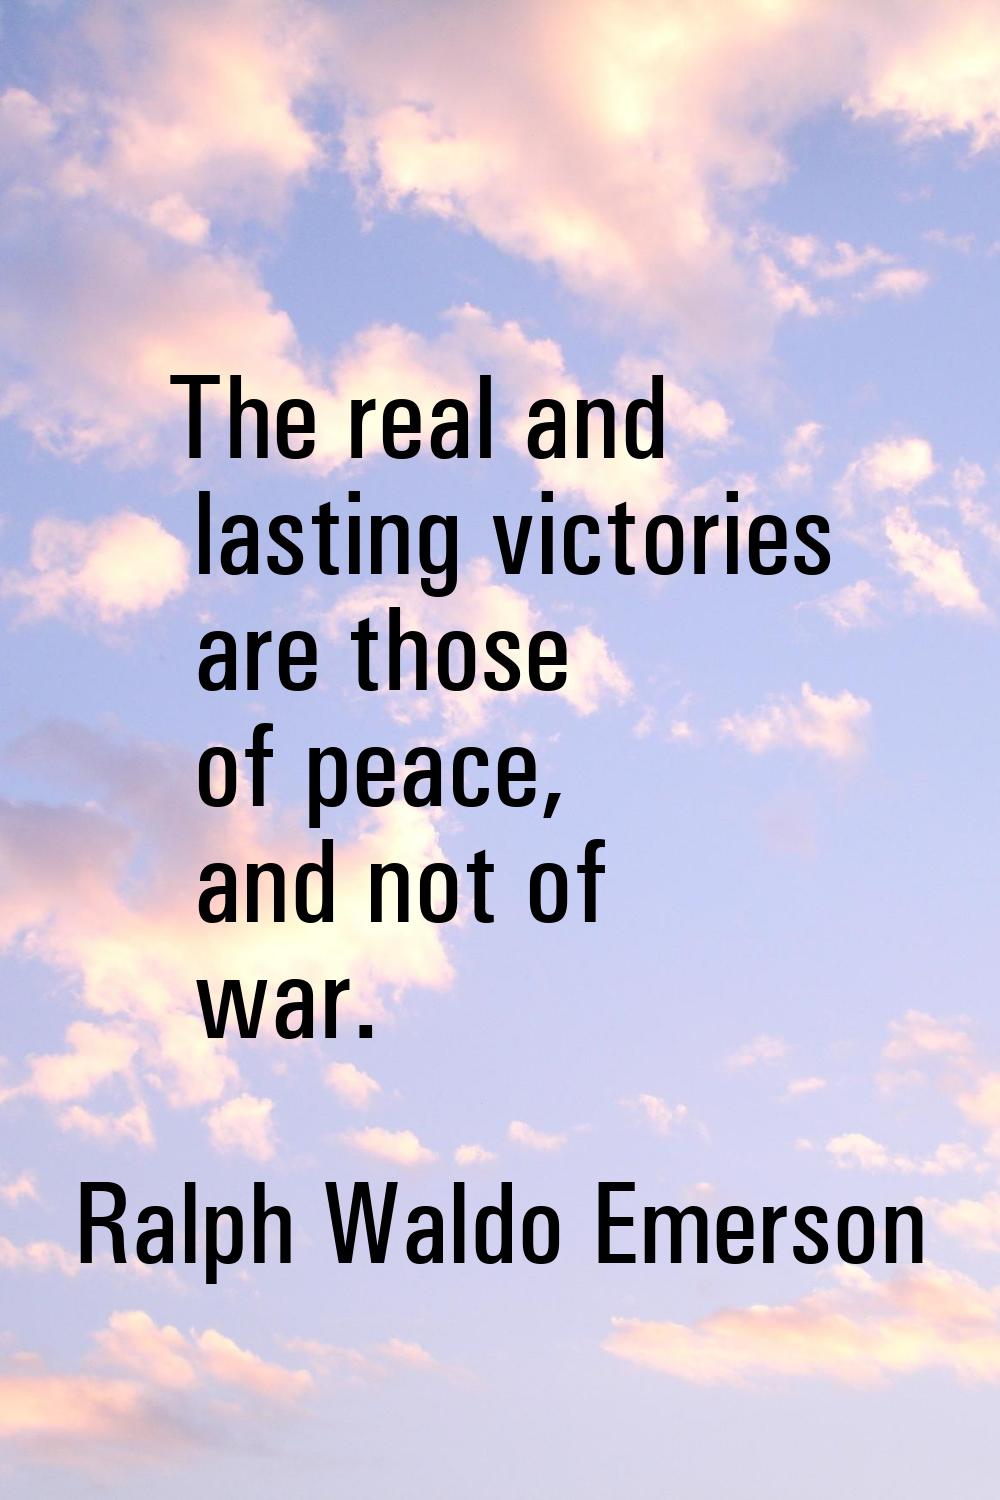 The real and lasting victories are those of peace, and not of war.